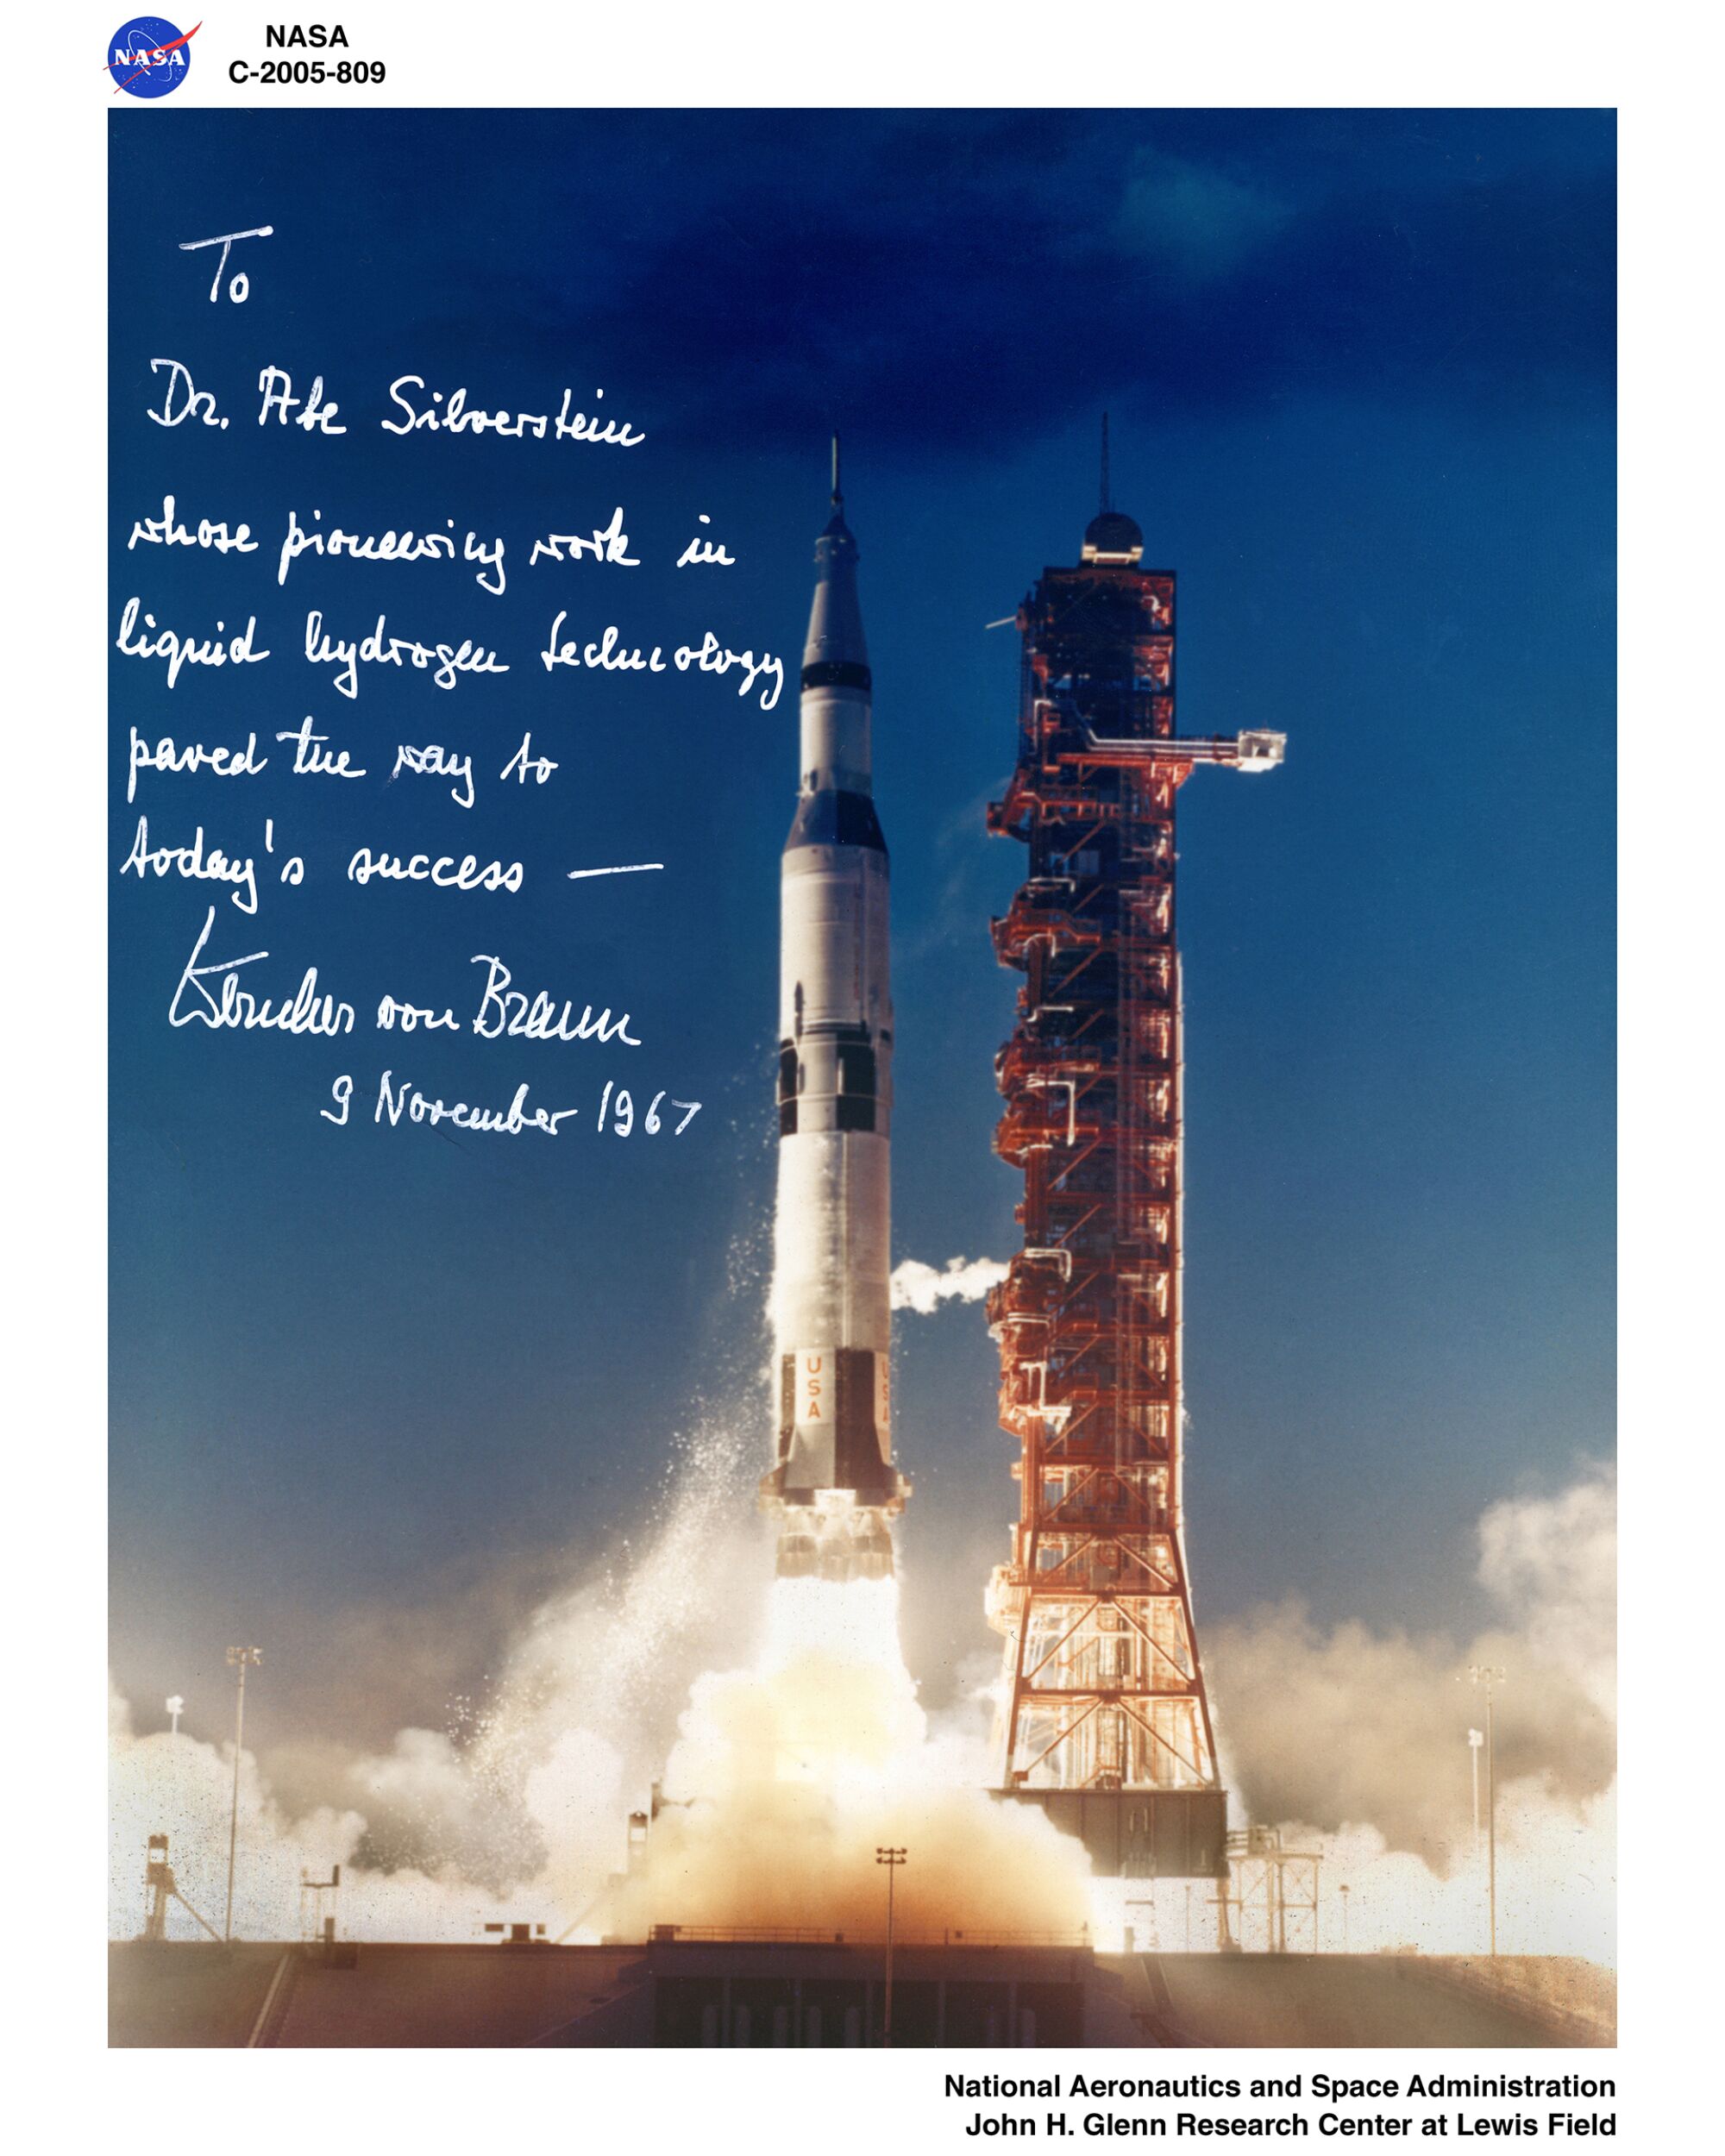 Signed photographic print of a Saturn 5 launch